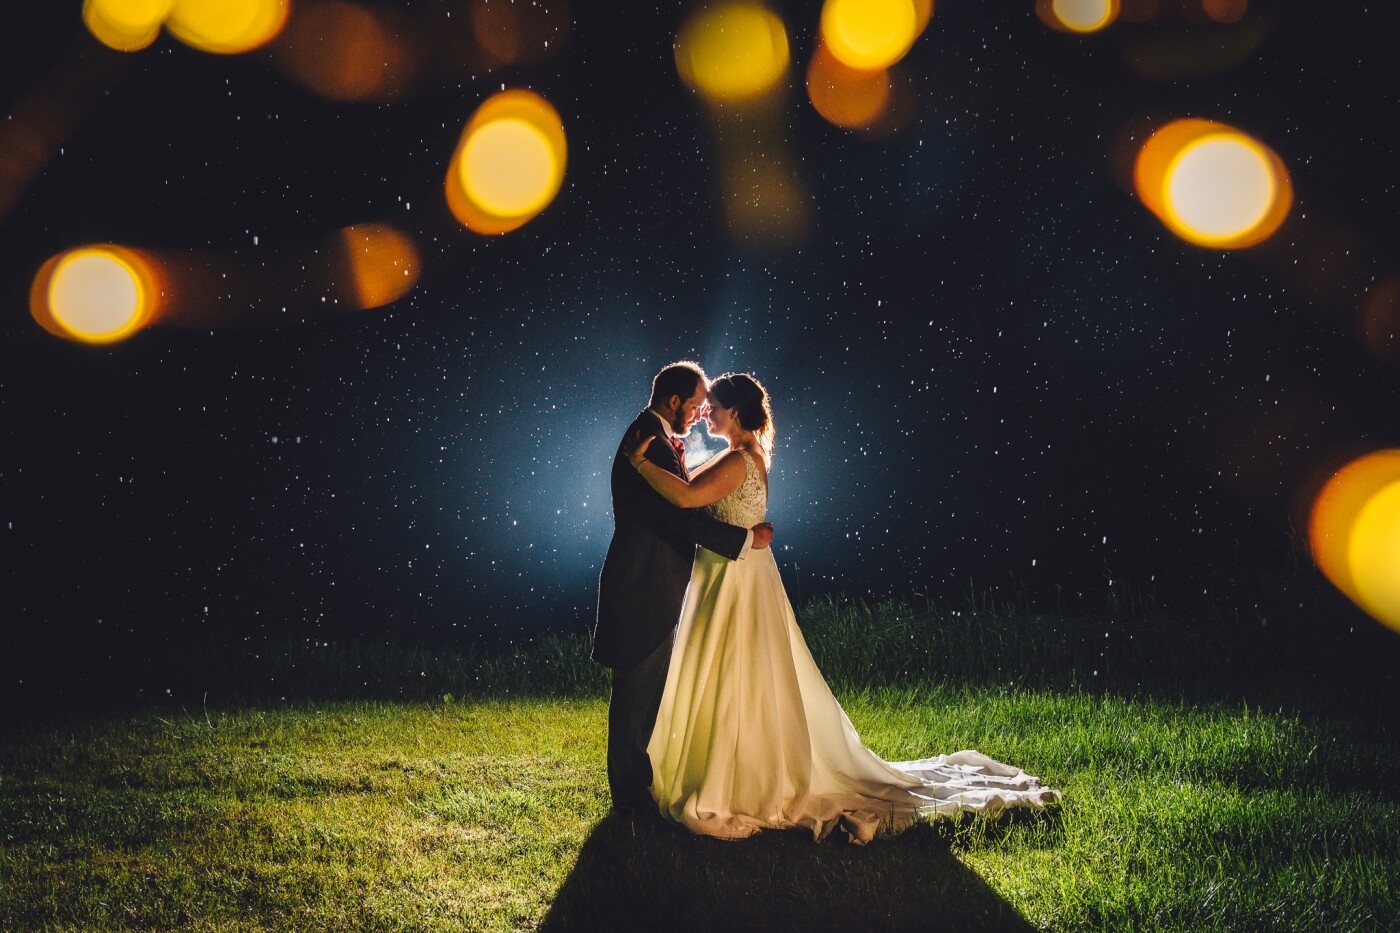 Alex & Charlie were a dream couple and up for any suggestion I had for images. The wedding was at Bordesley Park which offered so many locations for shots and we came away with loads of great portraits. Towards the end of the night the rain started and I knew I wanted to try a backlit image. I introduced some fairy lights to give some interest to the top of the frame, grabbed a bridesmaid to act as a human light stand and the rest is history.